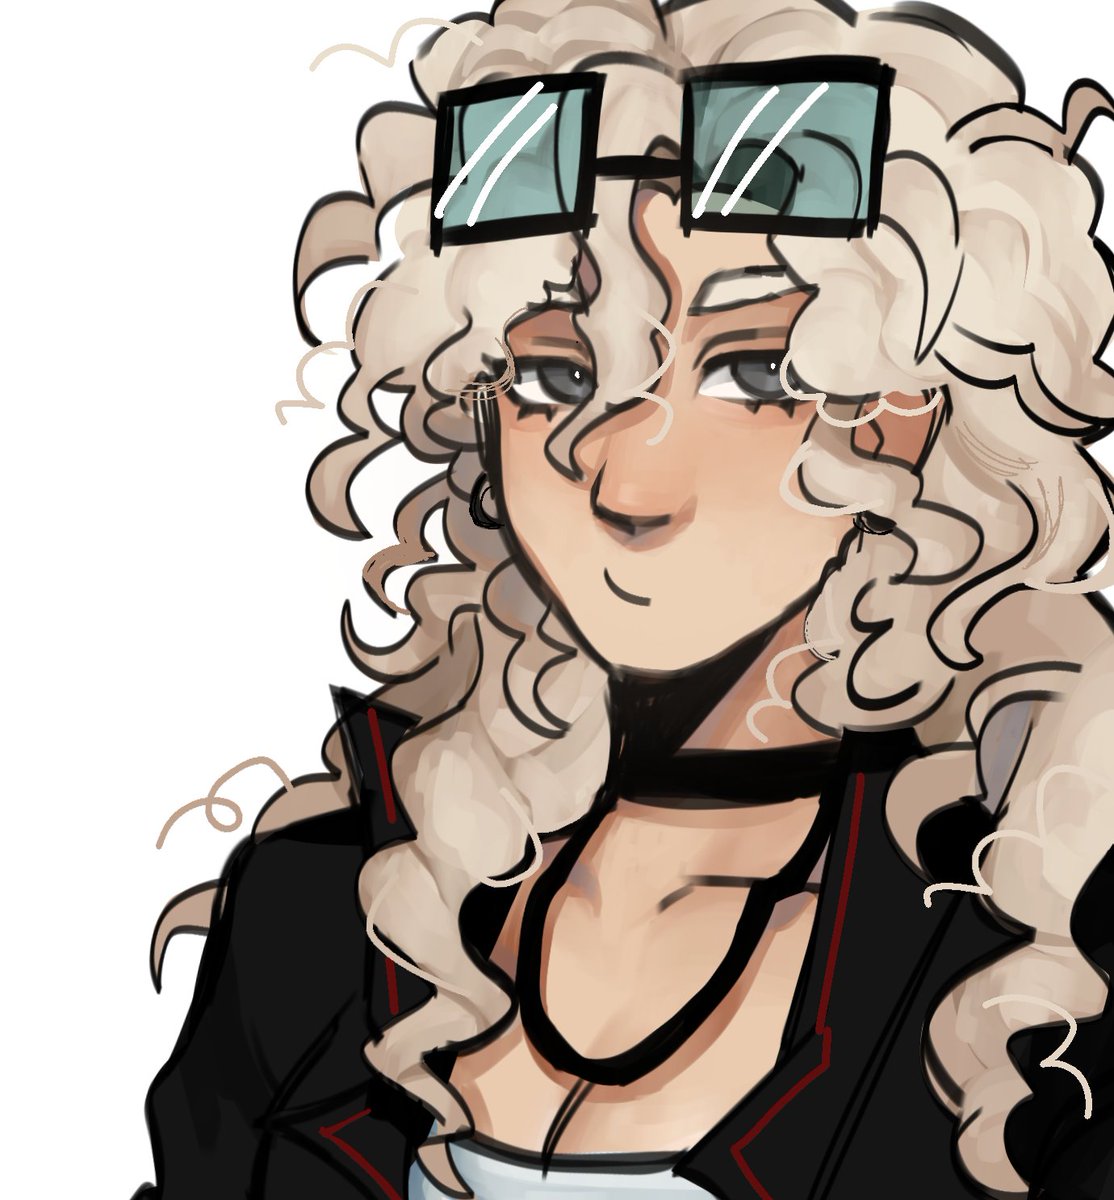 curly-haired celeste. thoughts?  -🌙
#itsfunnehyhs #krew